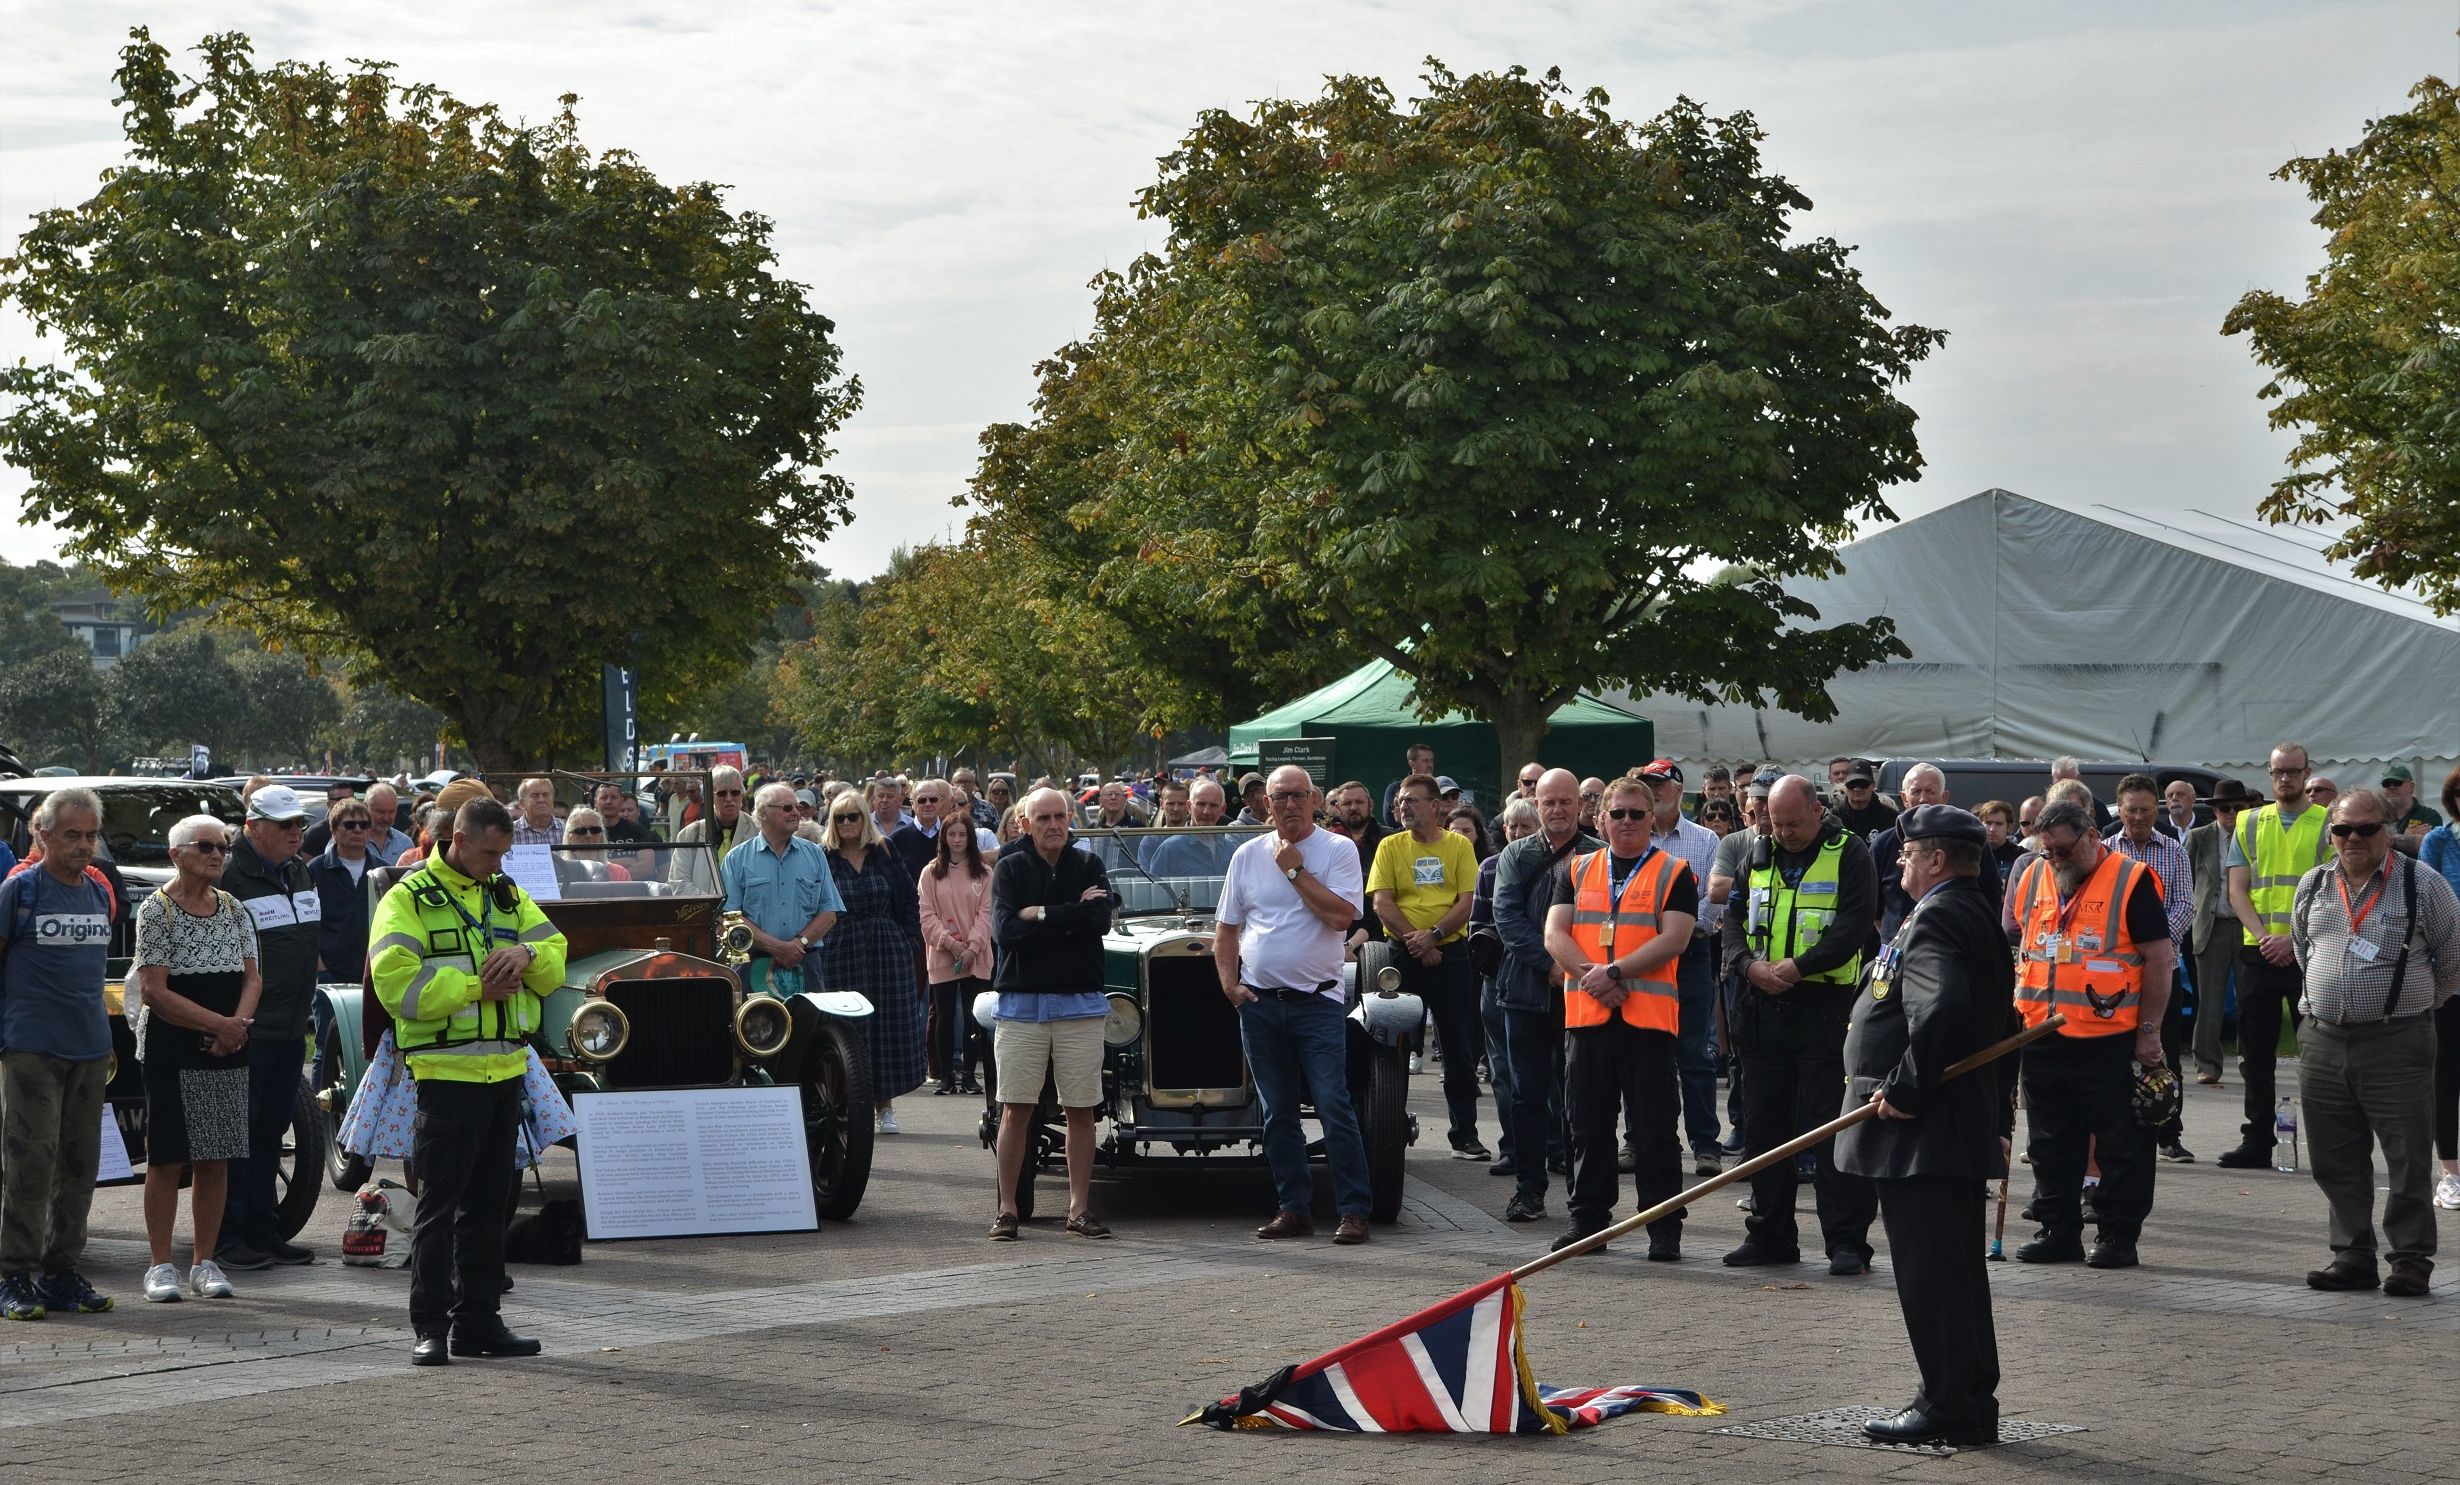 Crowds hold a two minutes' silence for Her Majesty Queen Elizabeth II at Southport Classic and Speed at Victoria Park in Southport. Photo by Stephen Mosley